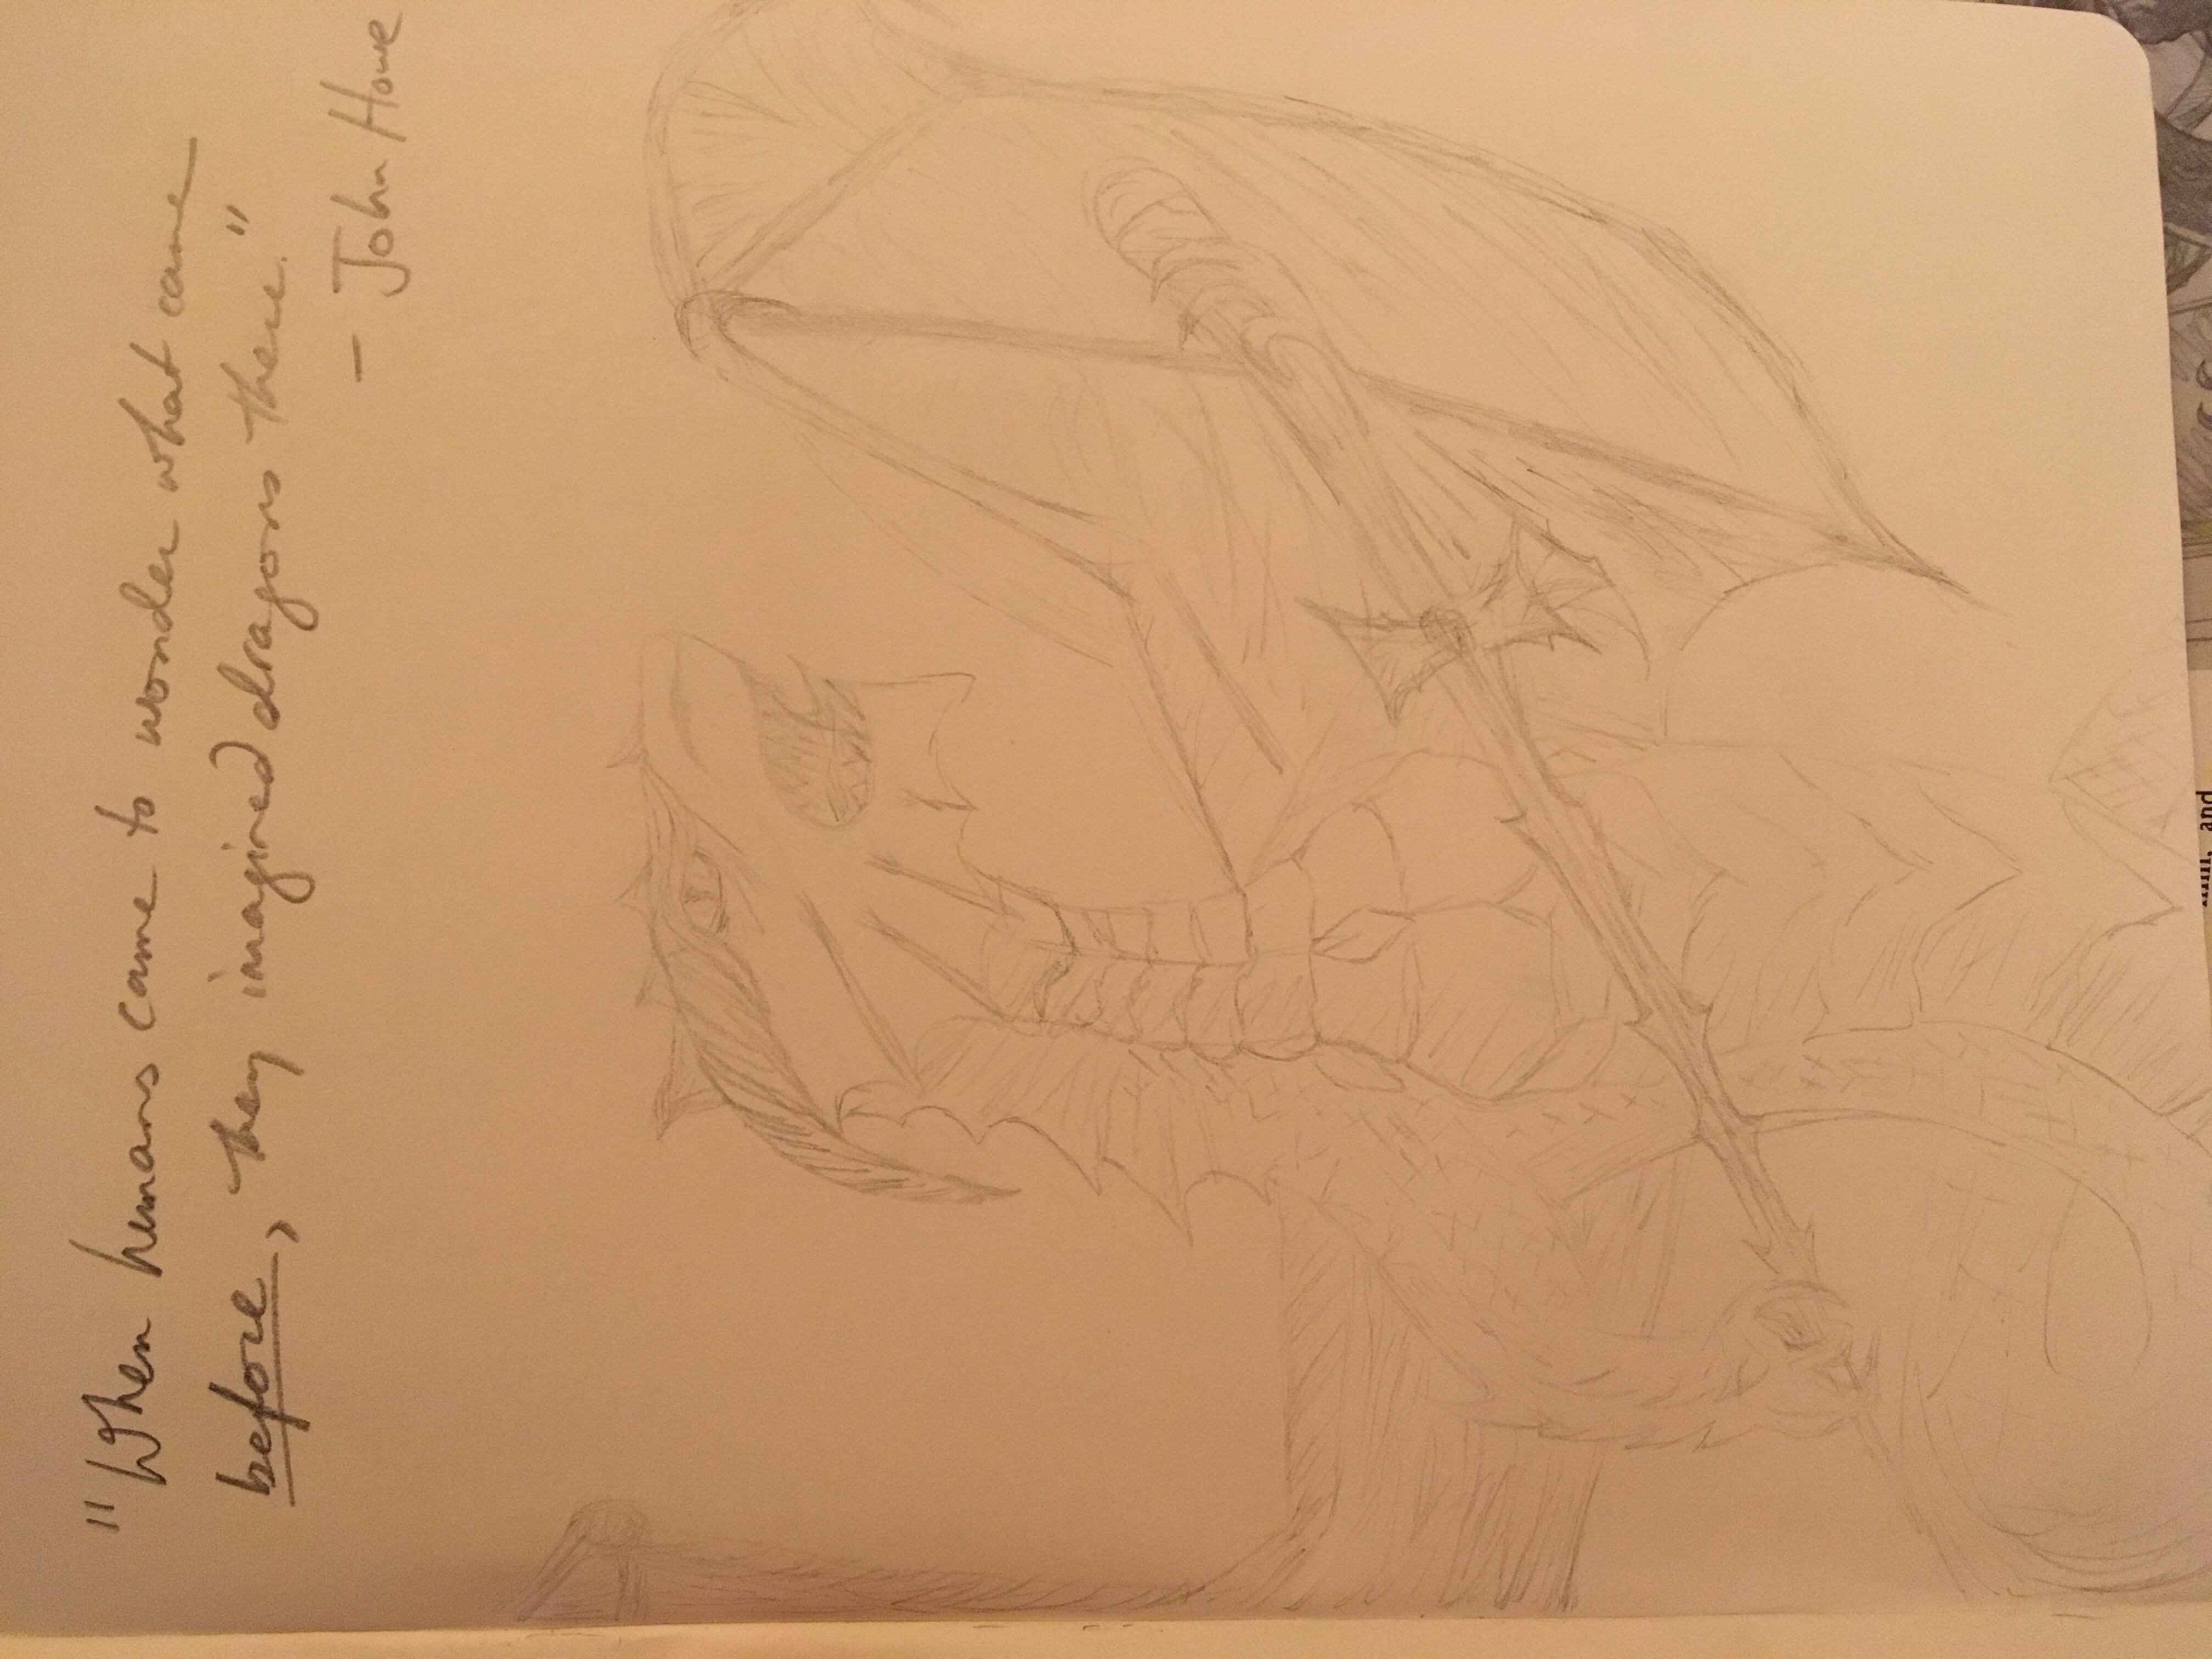 Again in pencil very detailed holding sword